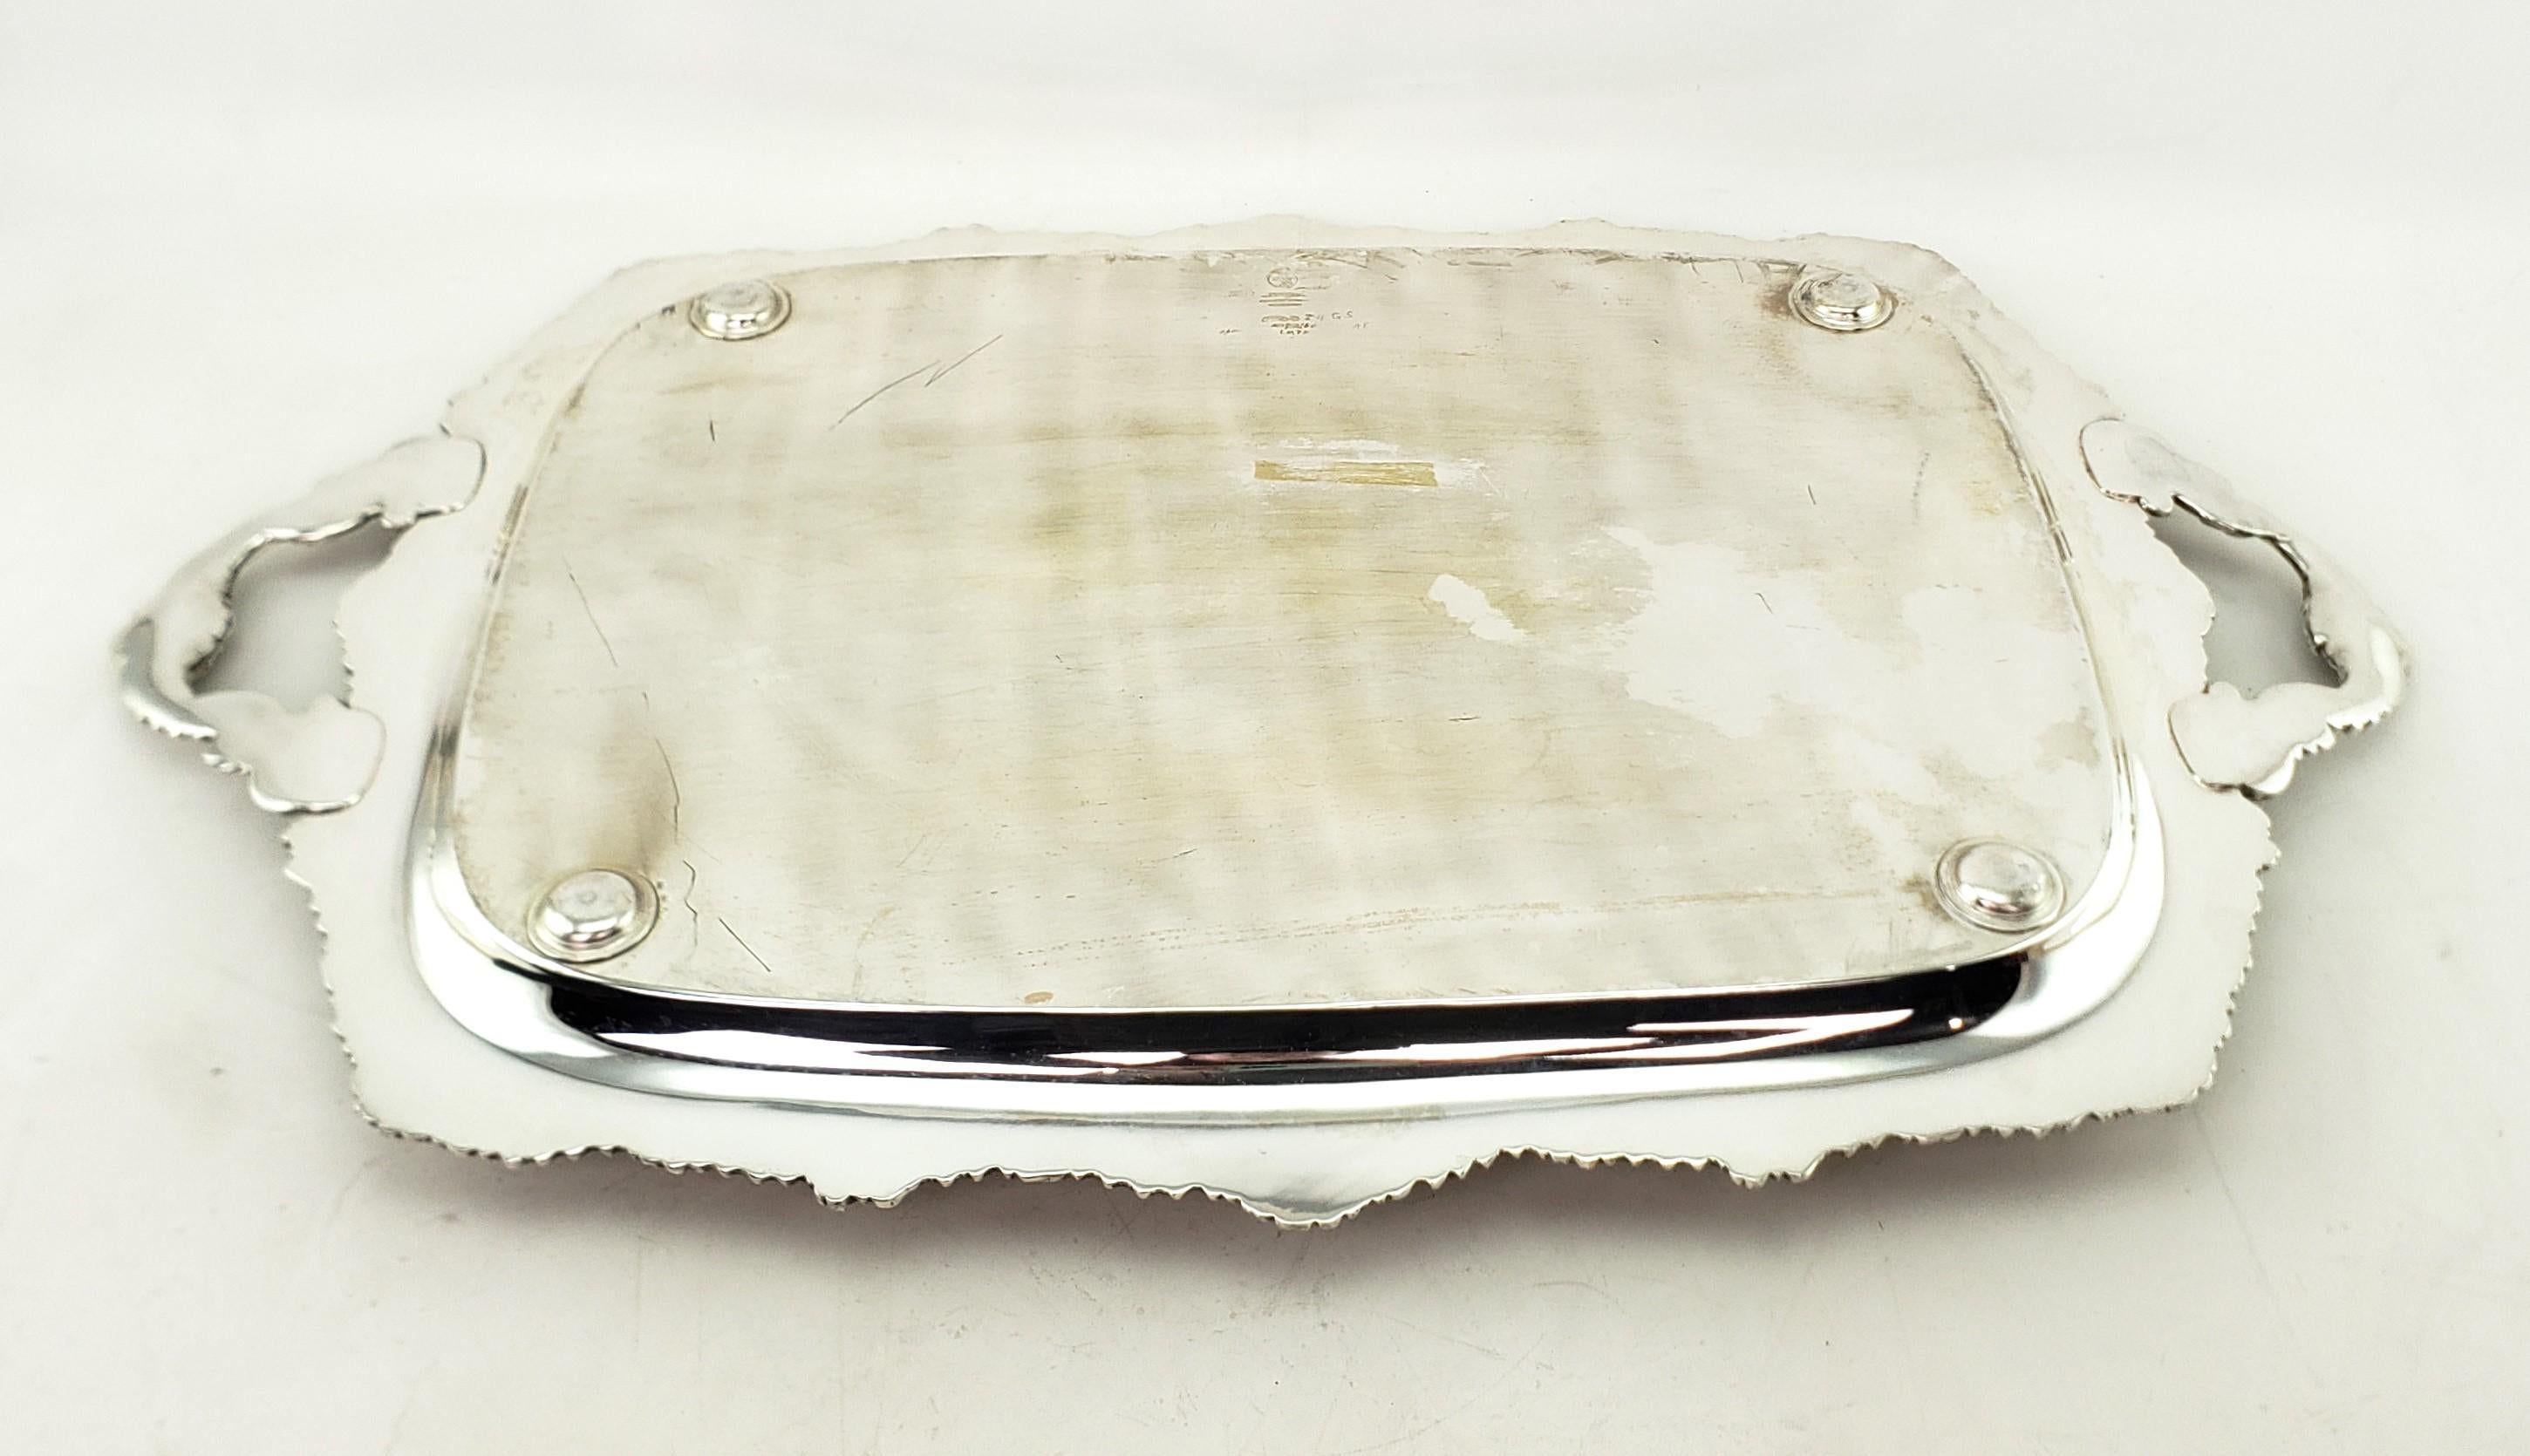 Large Antique English Silver Plated Serving Tray with Ornate Floral Decoration For Sale 10